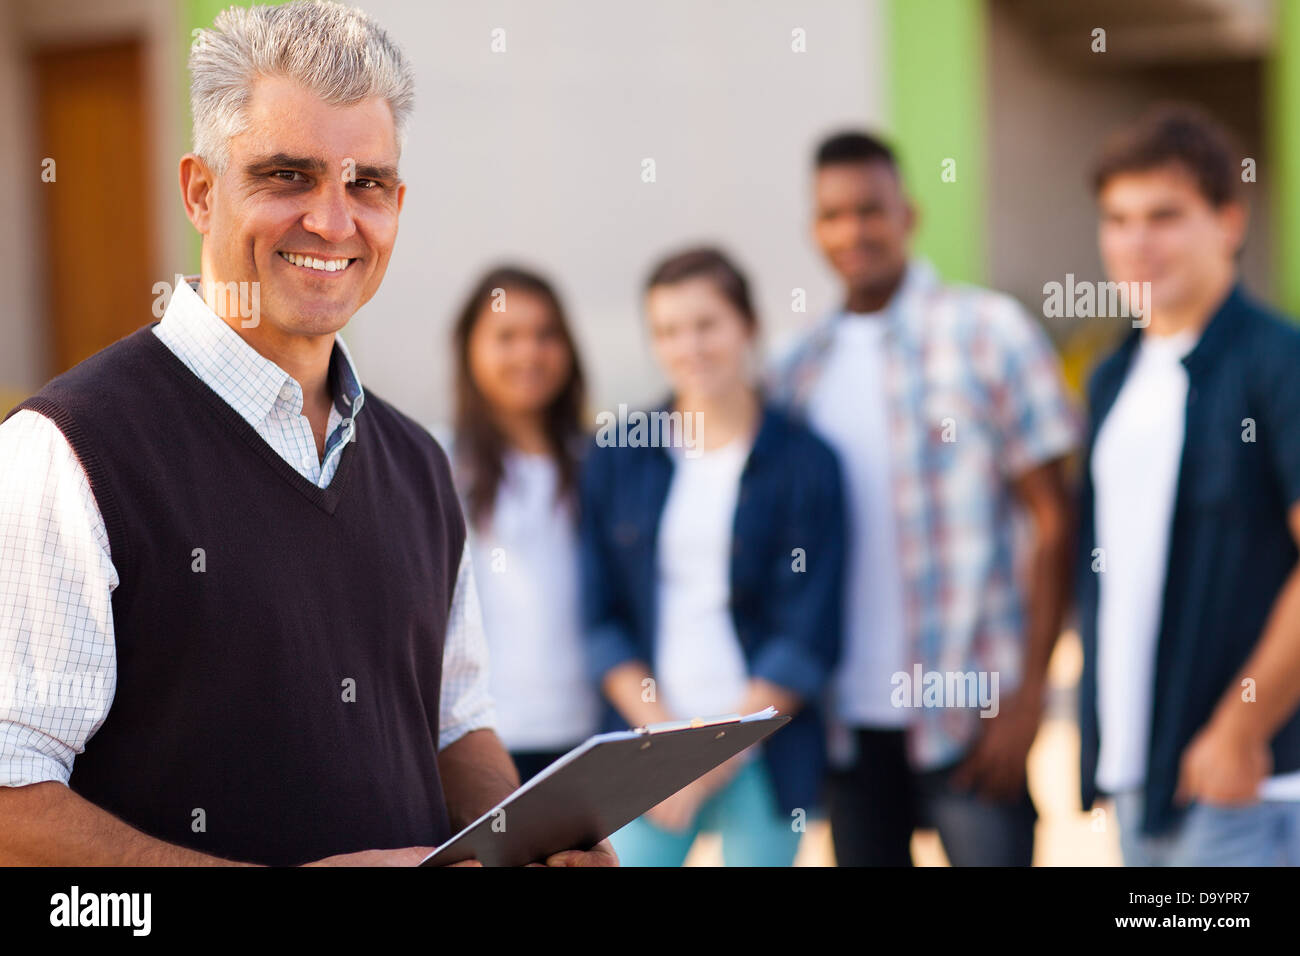 happy middle aged male high school teacher Stock Photo